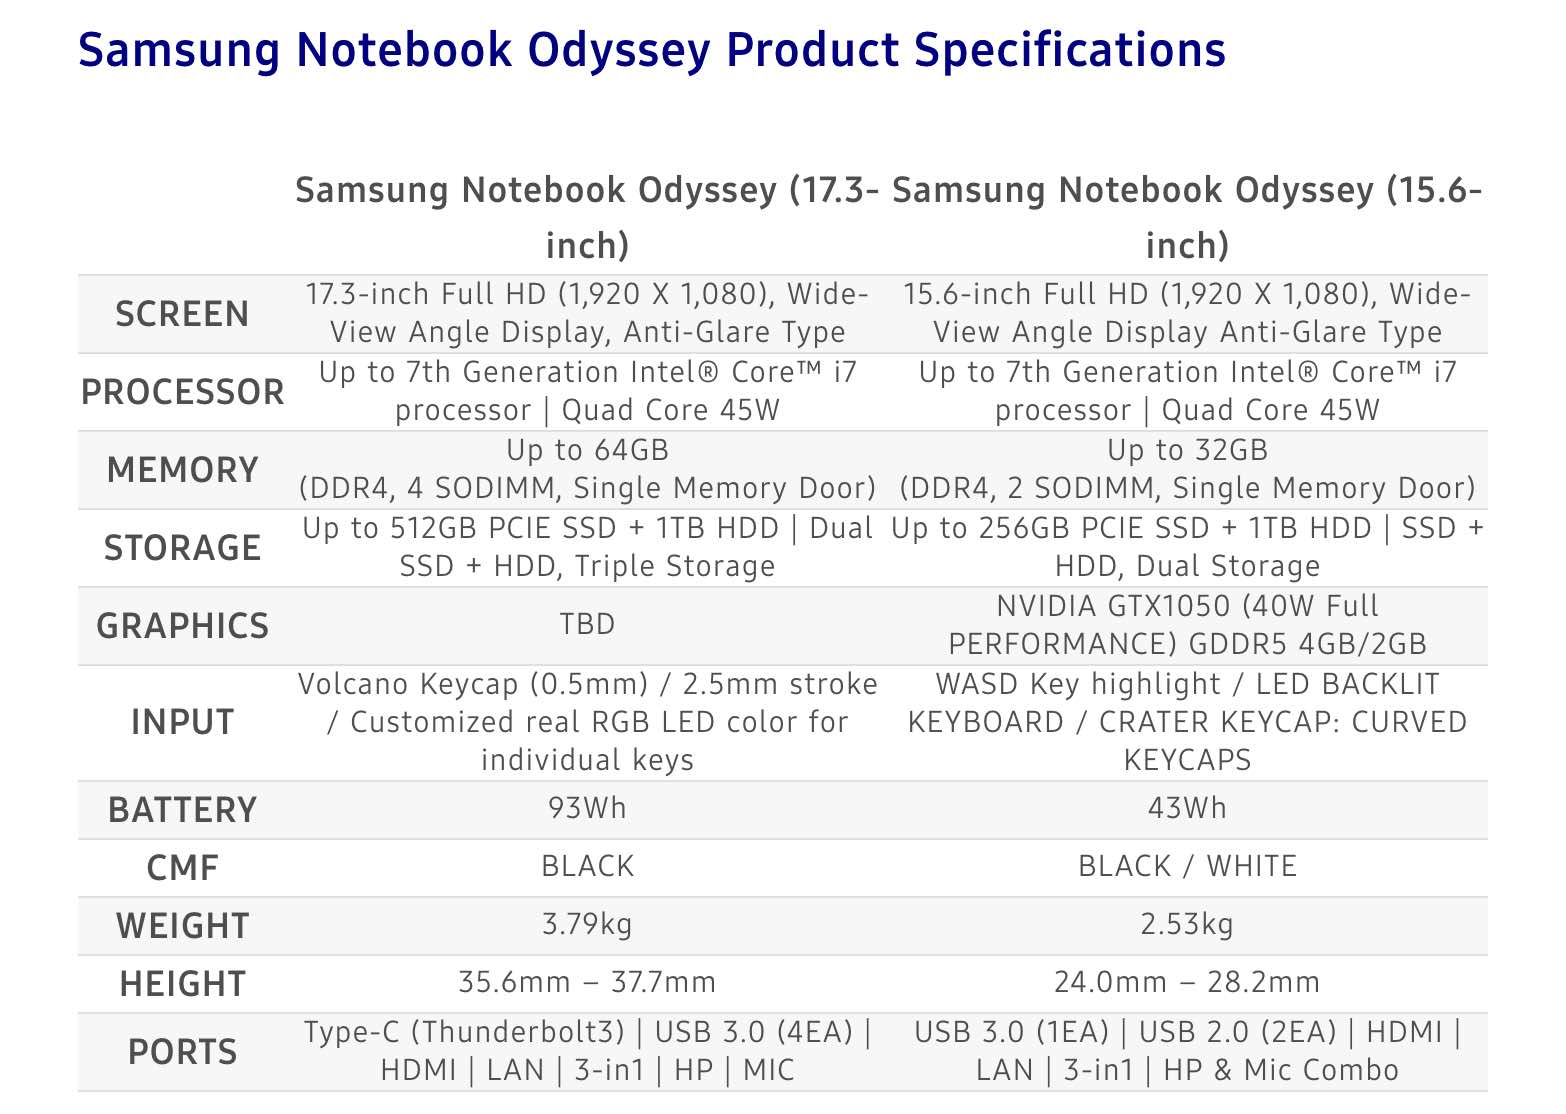 Samsung Notebook Odyssey Product Specifications